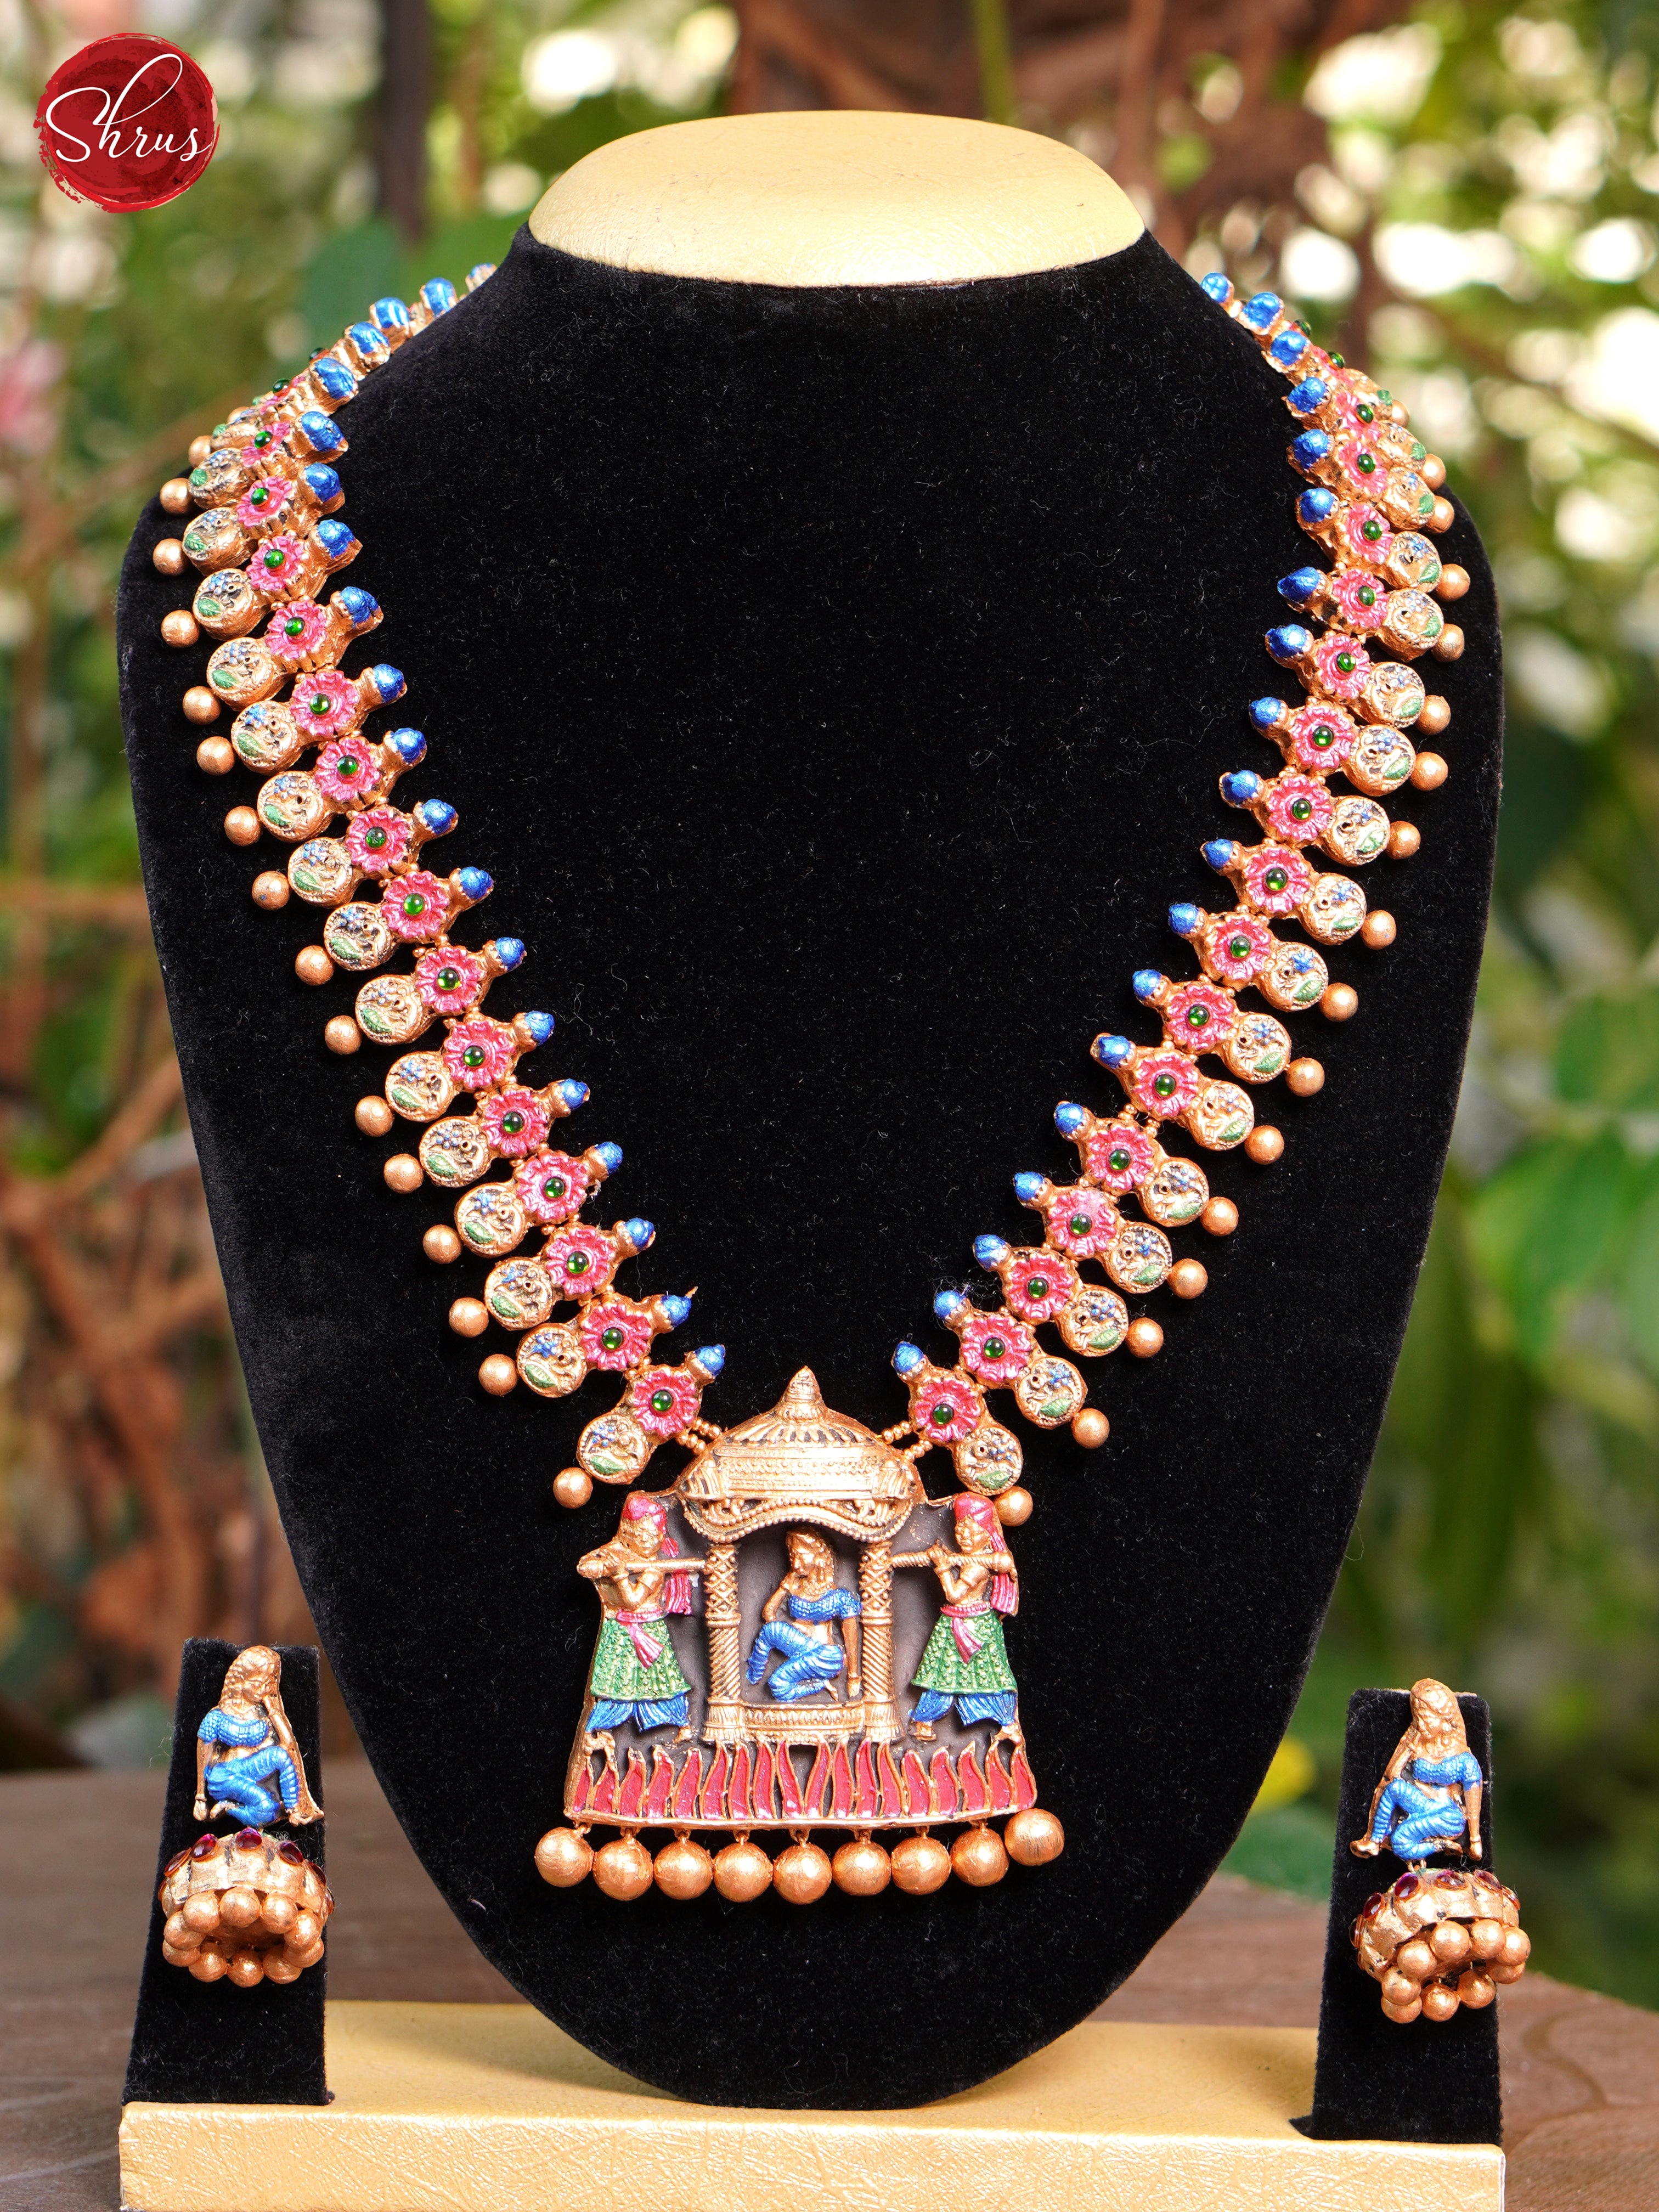 Handcrafted Pallaki pendant terracotta necklace with jhumkas  - Accessories - Shop on ShrusEternity.com